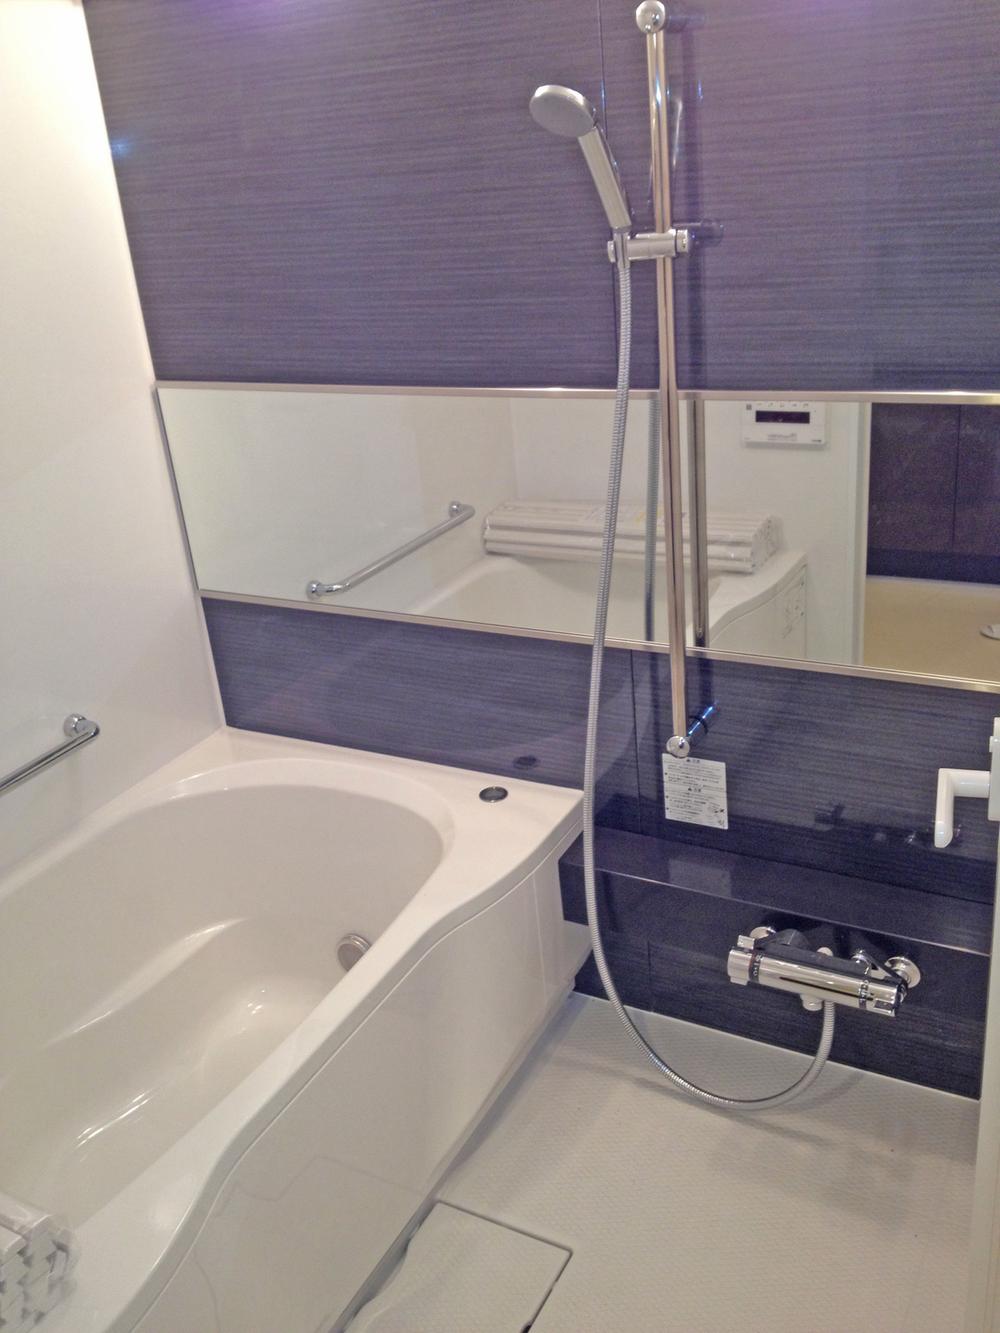 Bathroom. Drop the fatigue of the day with a spacious bathroom